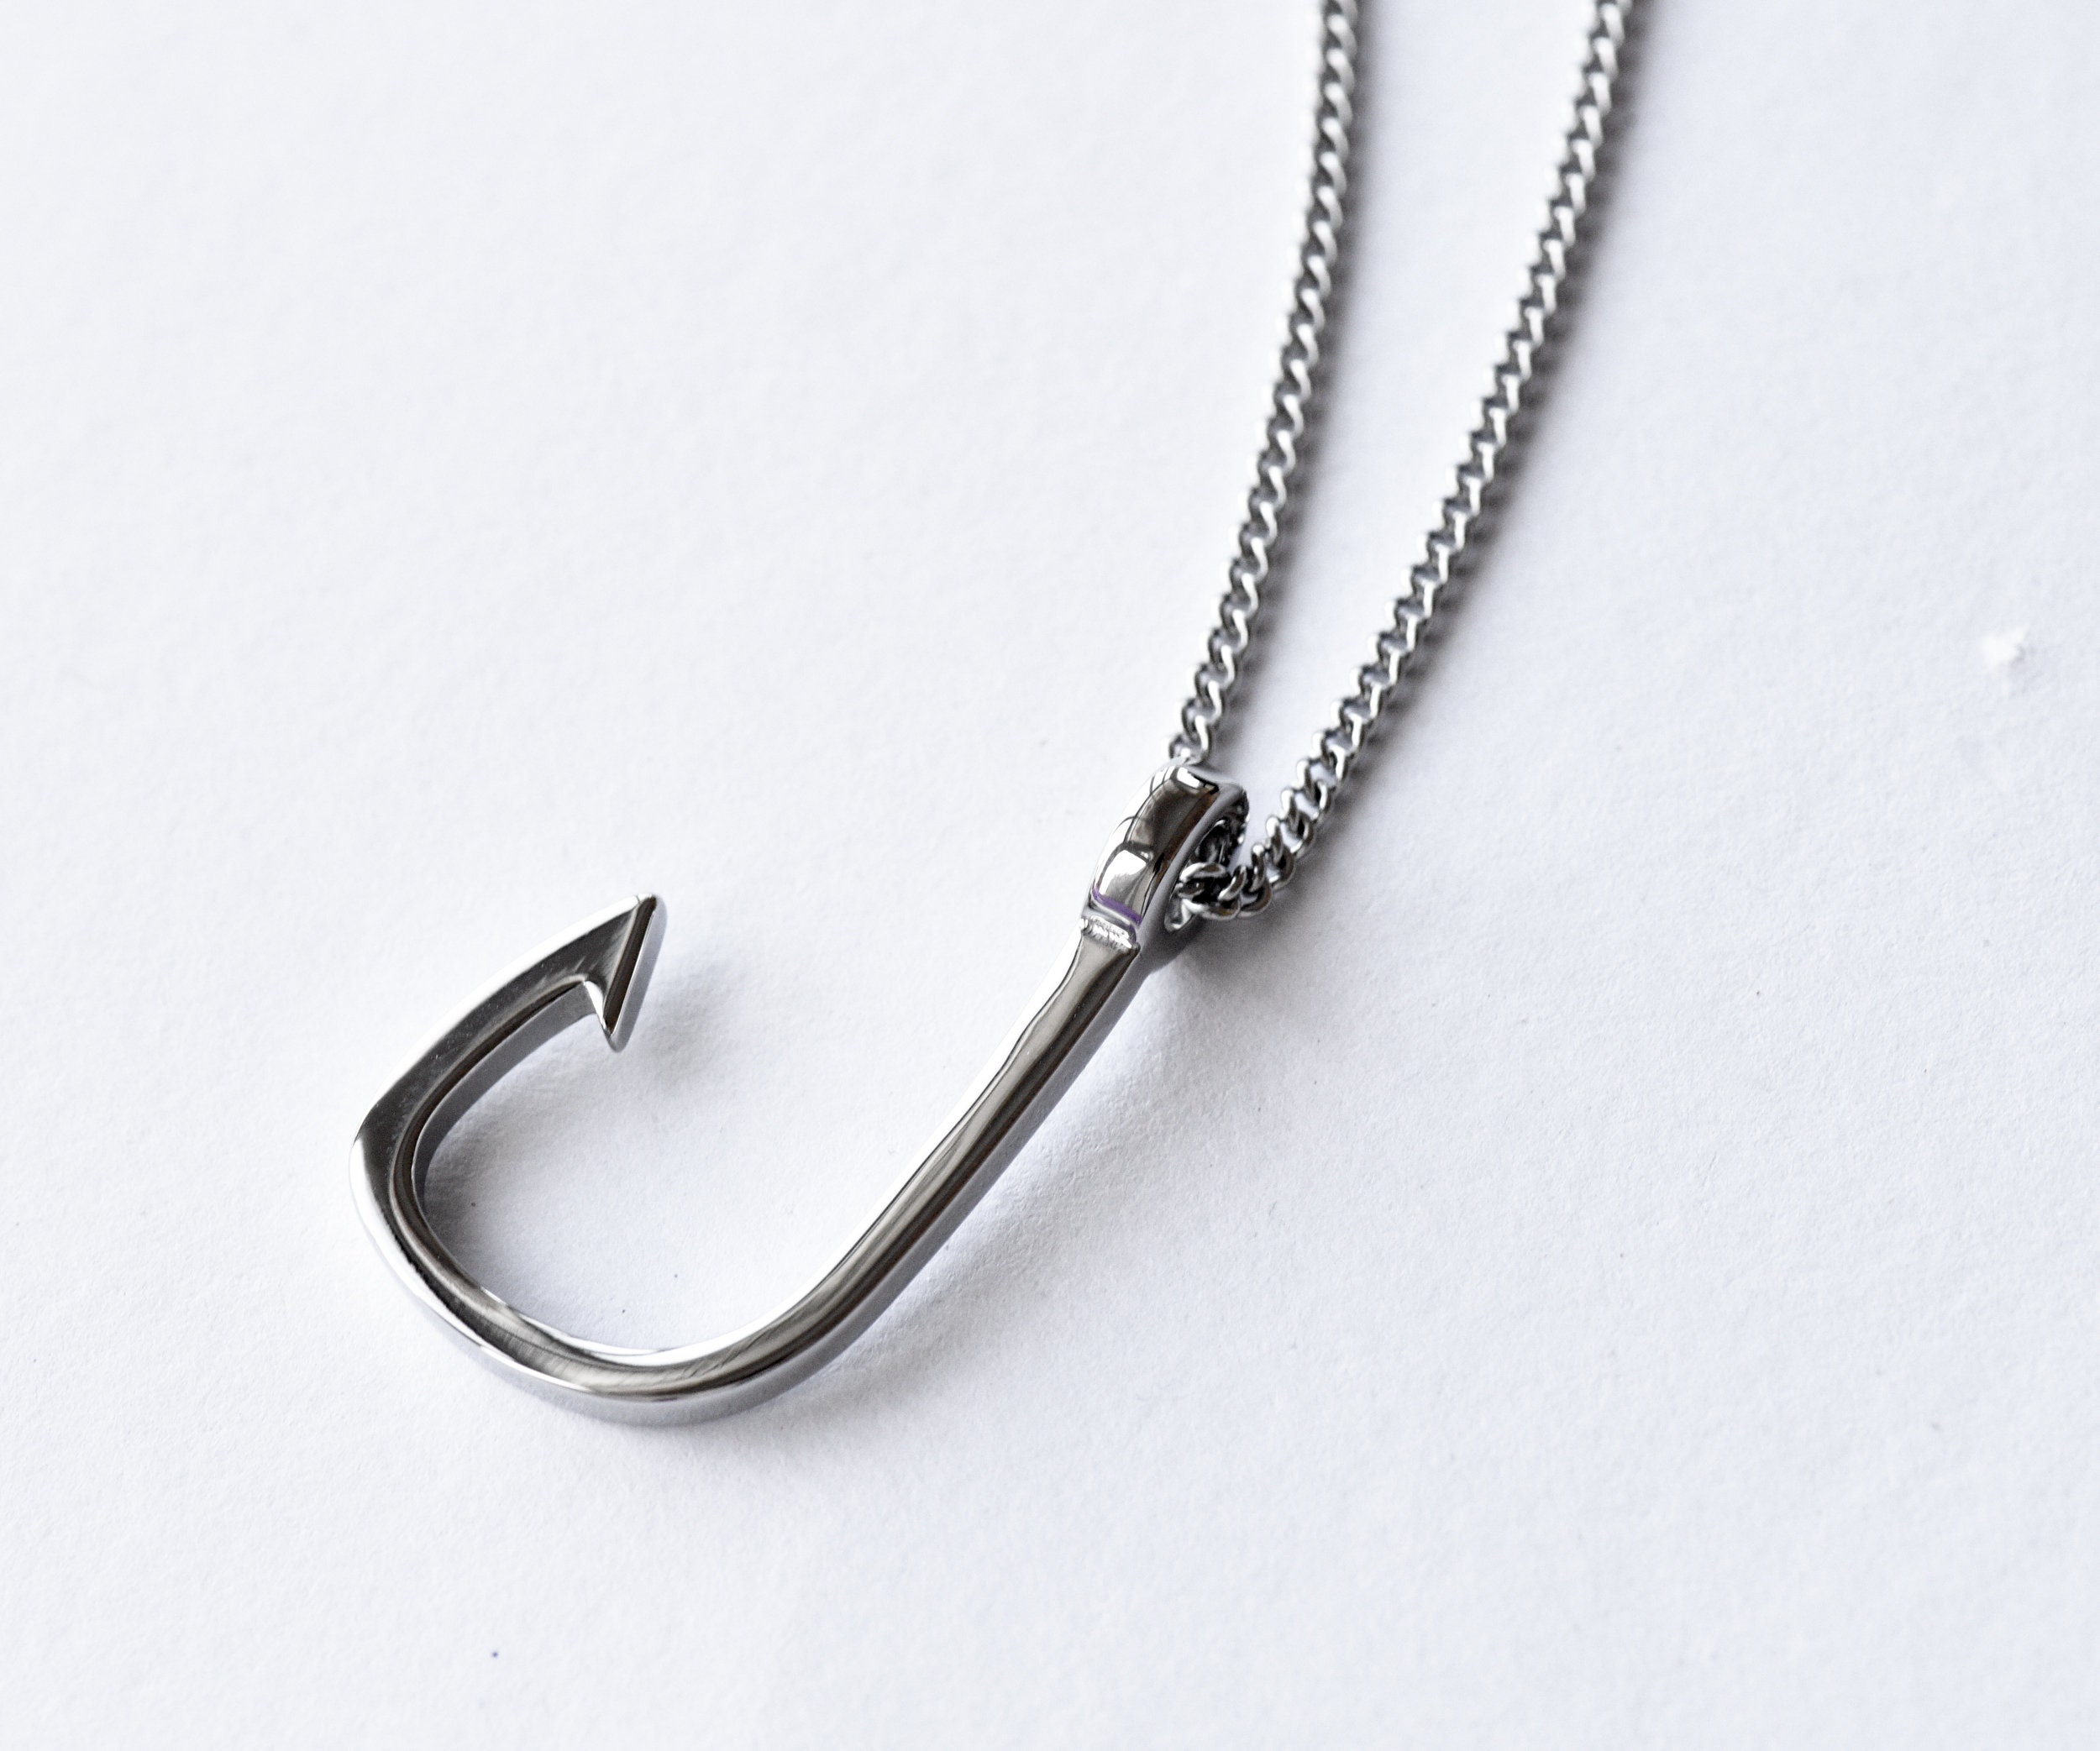 Stainless Steel Necklace Silver Fish Hook Necklace Mens Necklace Pendant  Punk Gift by Dark Dream Jewellery 